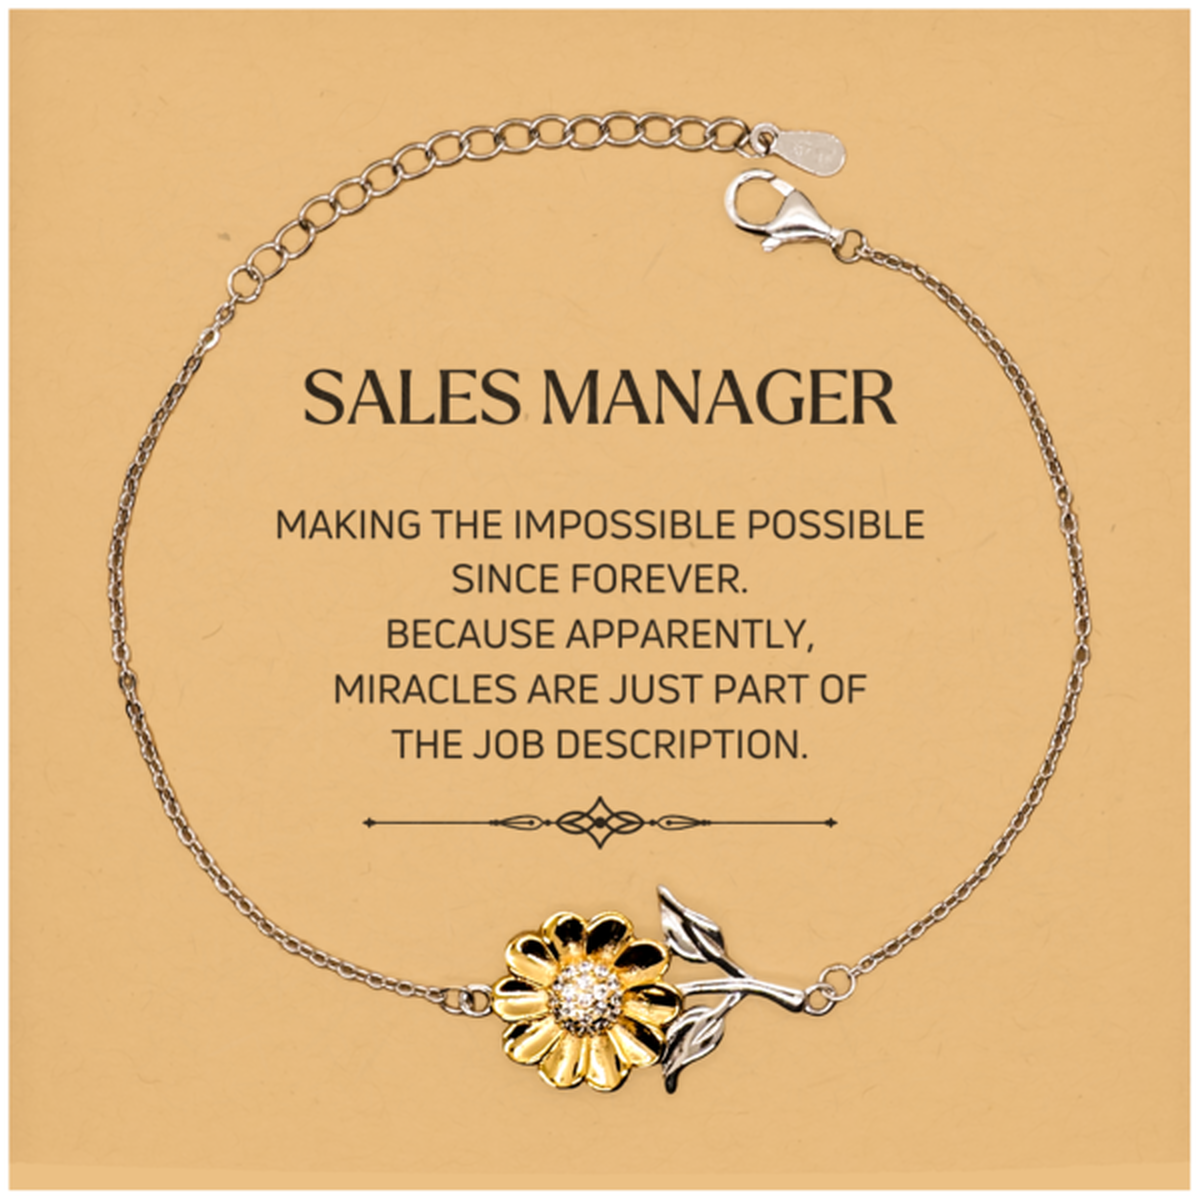 Funny Sales Manager Gifts, Miracles are just part of the job description, Inspirational Birthday Christmas Sunflower Bracelet For Sales Manager, Men, Women, Coworkers, Friends, Boss